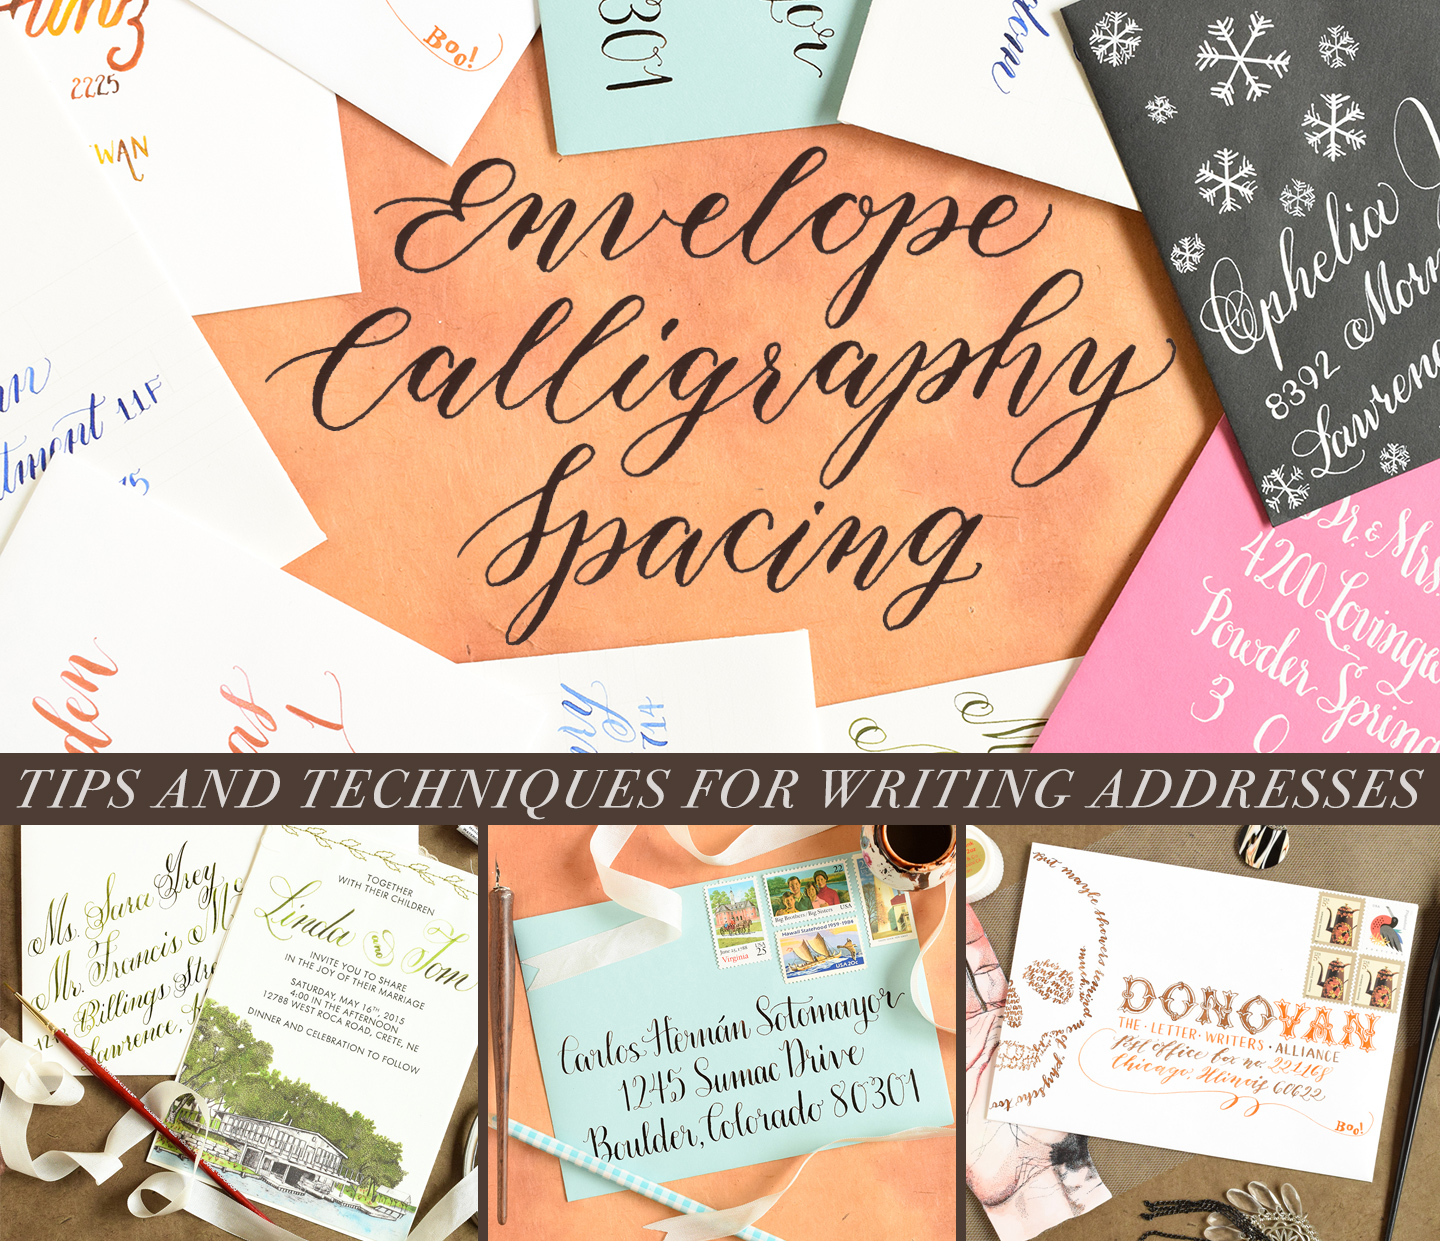 Envelope Calligraphy Spacing Tips and Techniques